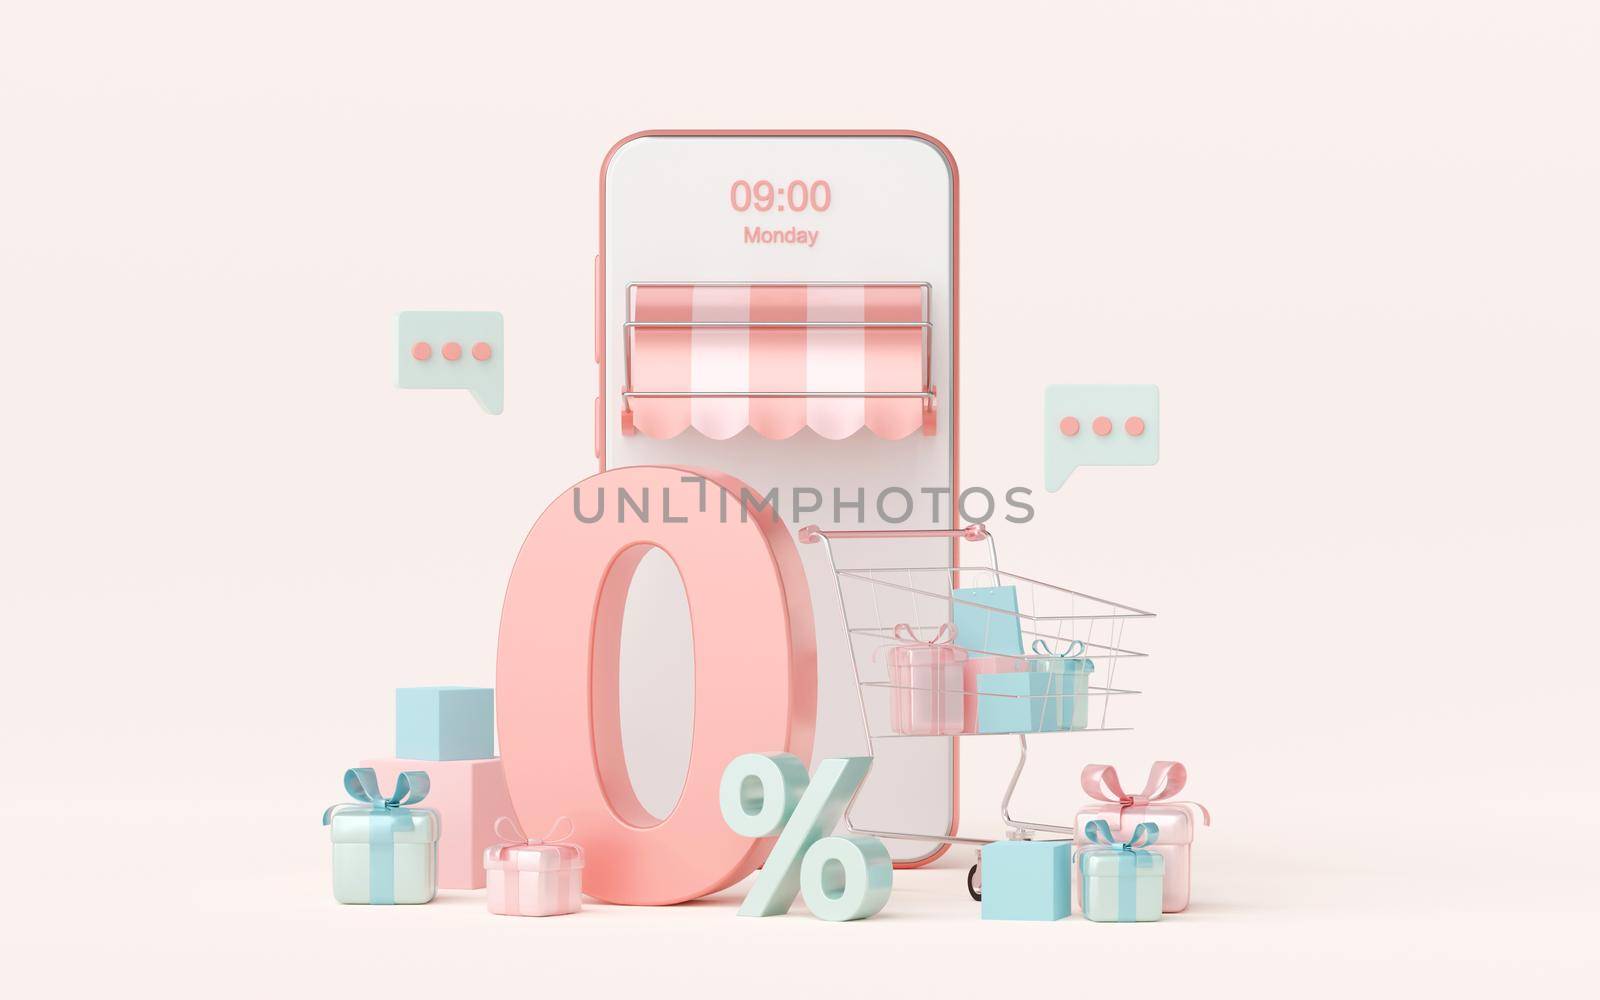 Shopping online using credit card with zero percent interest installment payments on smartphone, 3d illustration